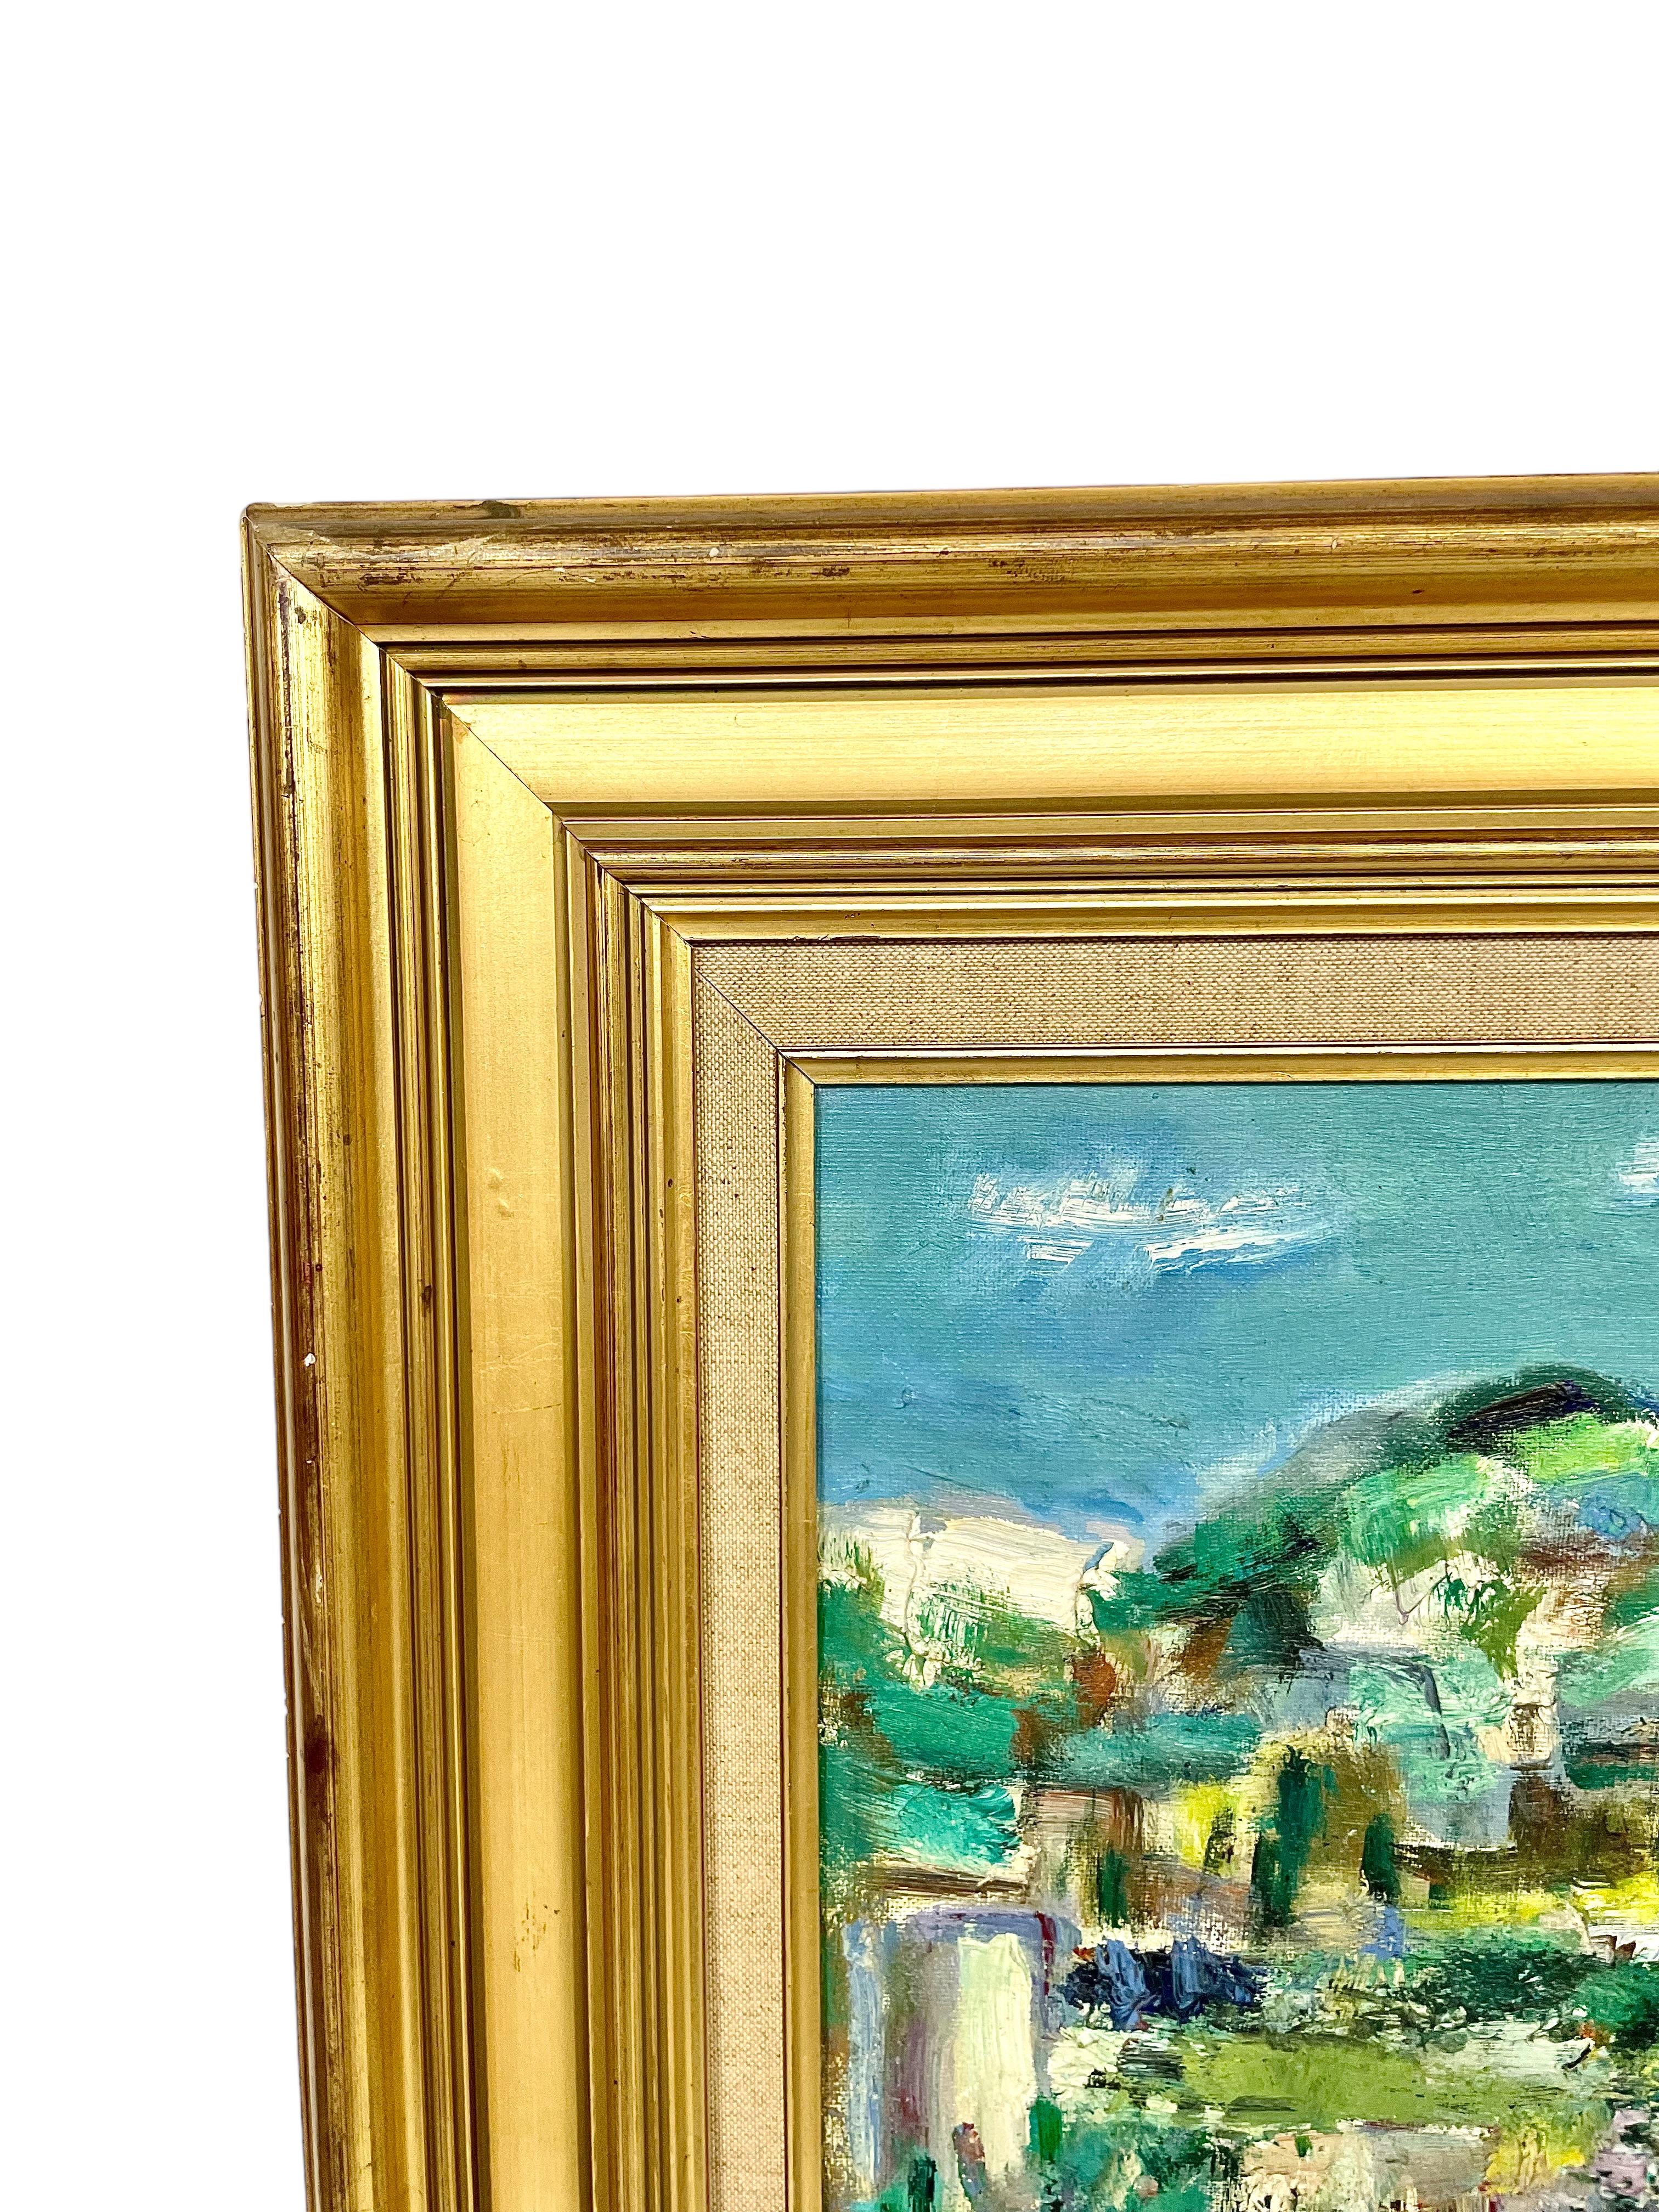 A sun-drenched provençal landscape is brought vividly to life in this 20th century post- impressionist style oil-on-canvas. Undulating hills in the distance provide an evocative backdrop for clusters of white-painted, red-roofed houses, nestling